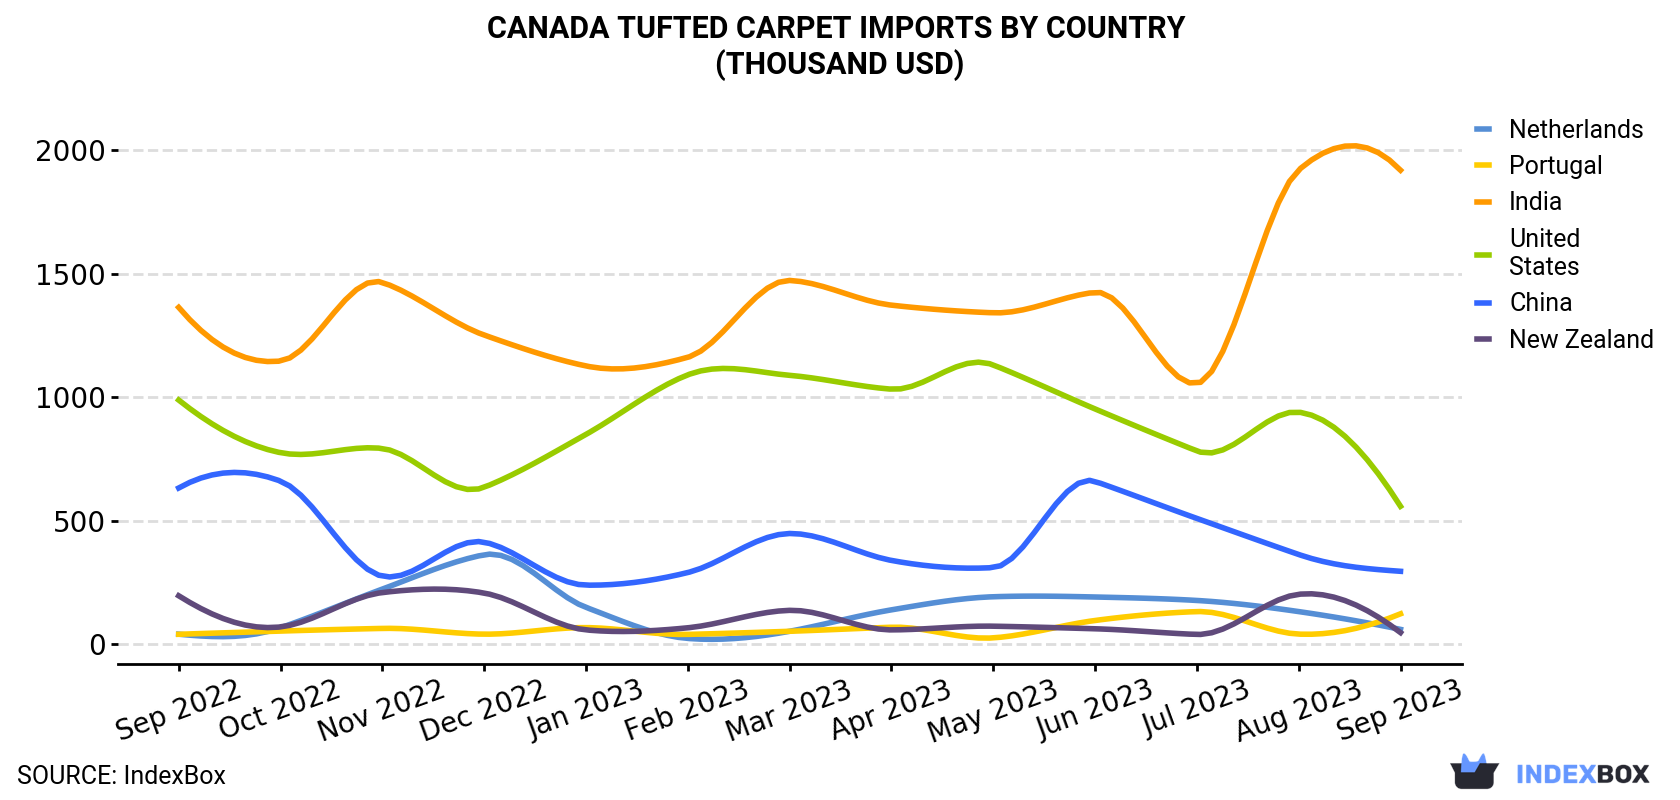 Canada Tufted Carpet Imports By Country (Thousand USD)